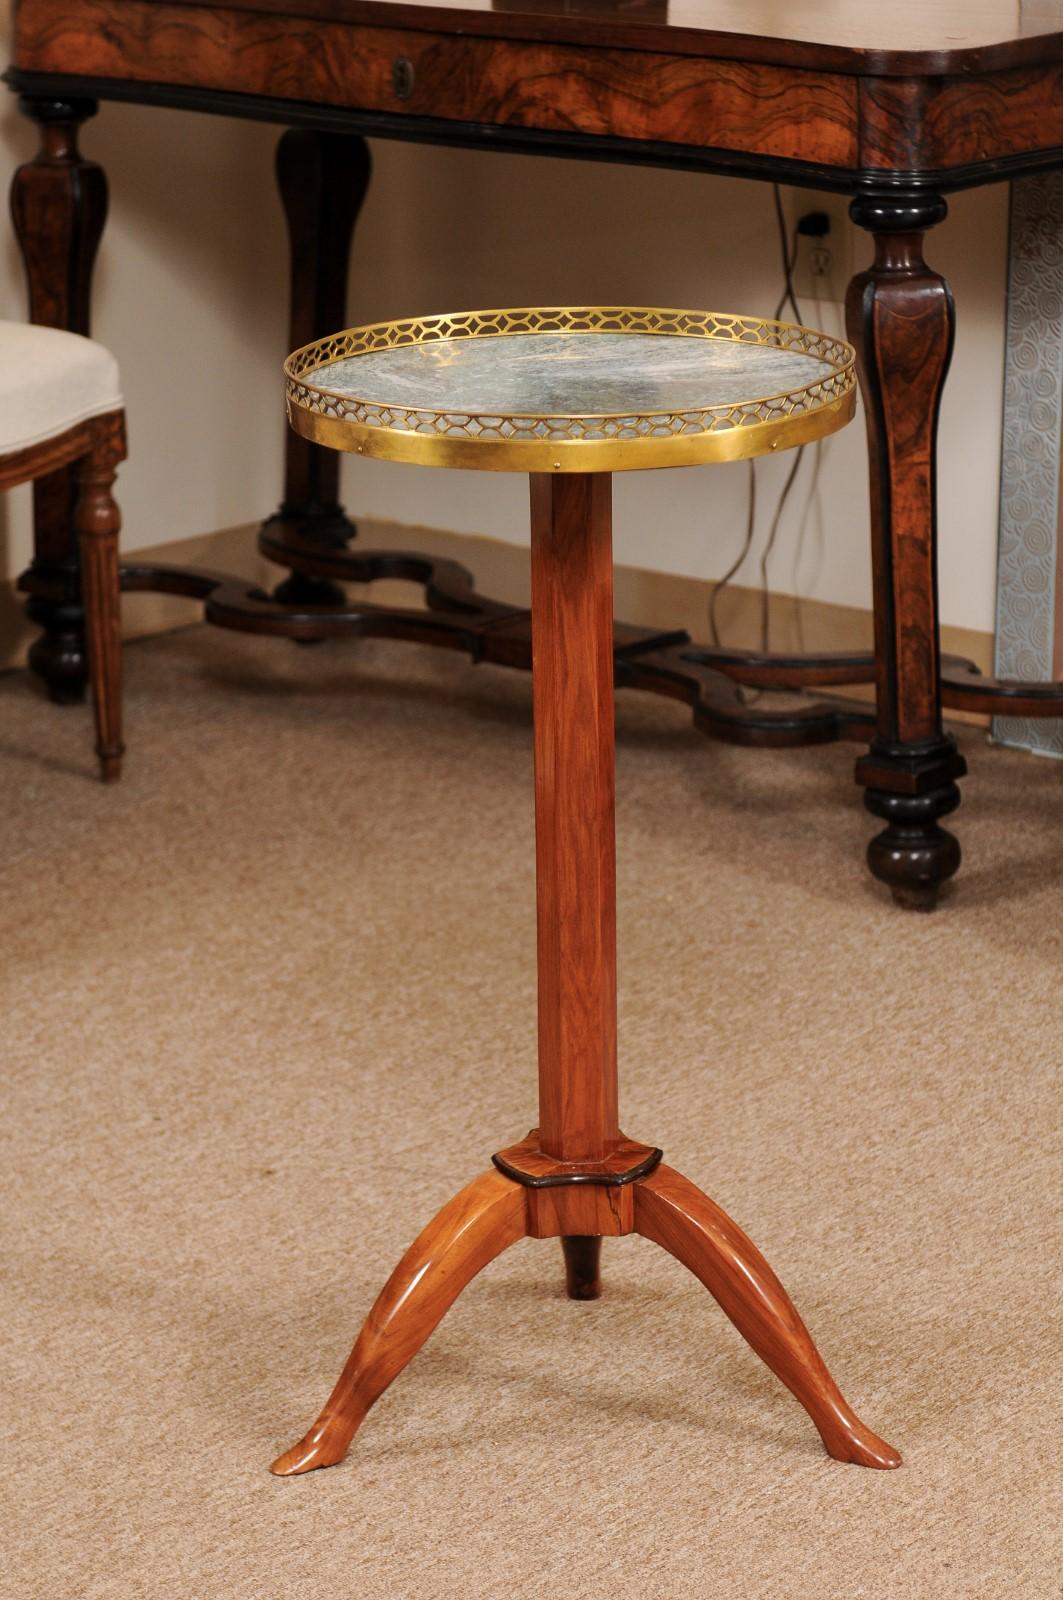 The French Directoire French candle stand featuring round green marble top with brass gallery, pedestal base and tripod legs.

 